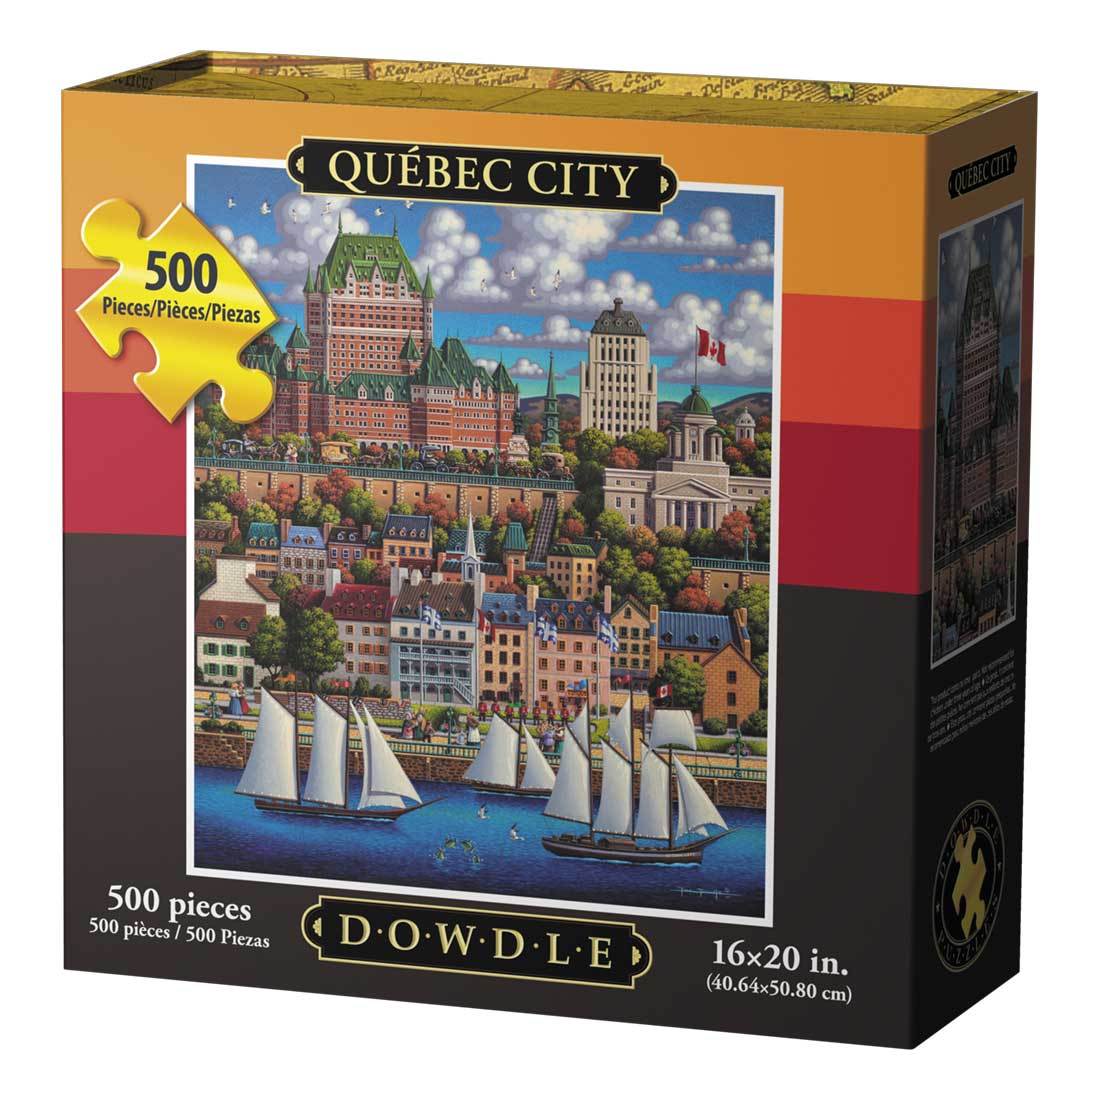 00190 16 X 20 In. Quebec City Jigsaw Puzzle - 500 Piece